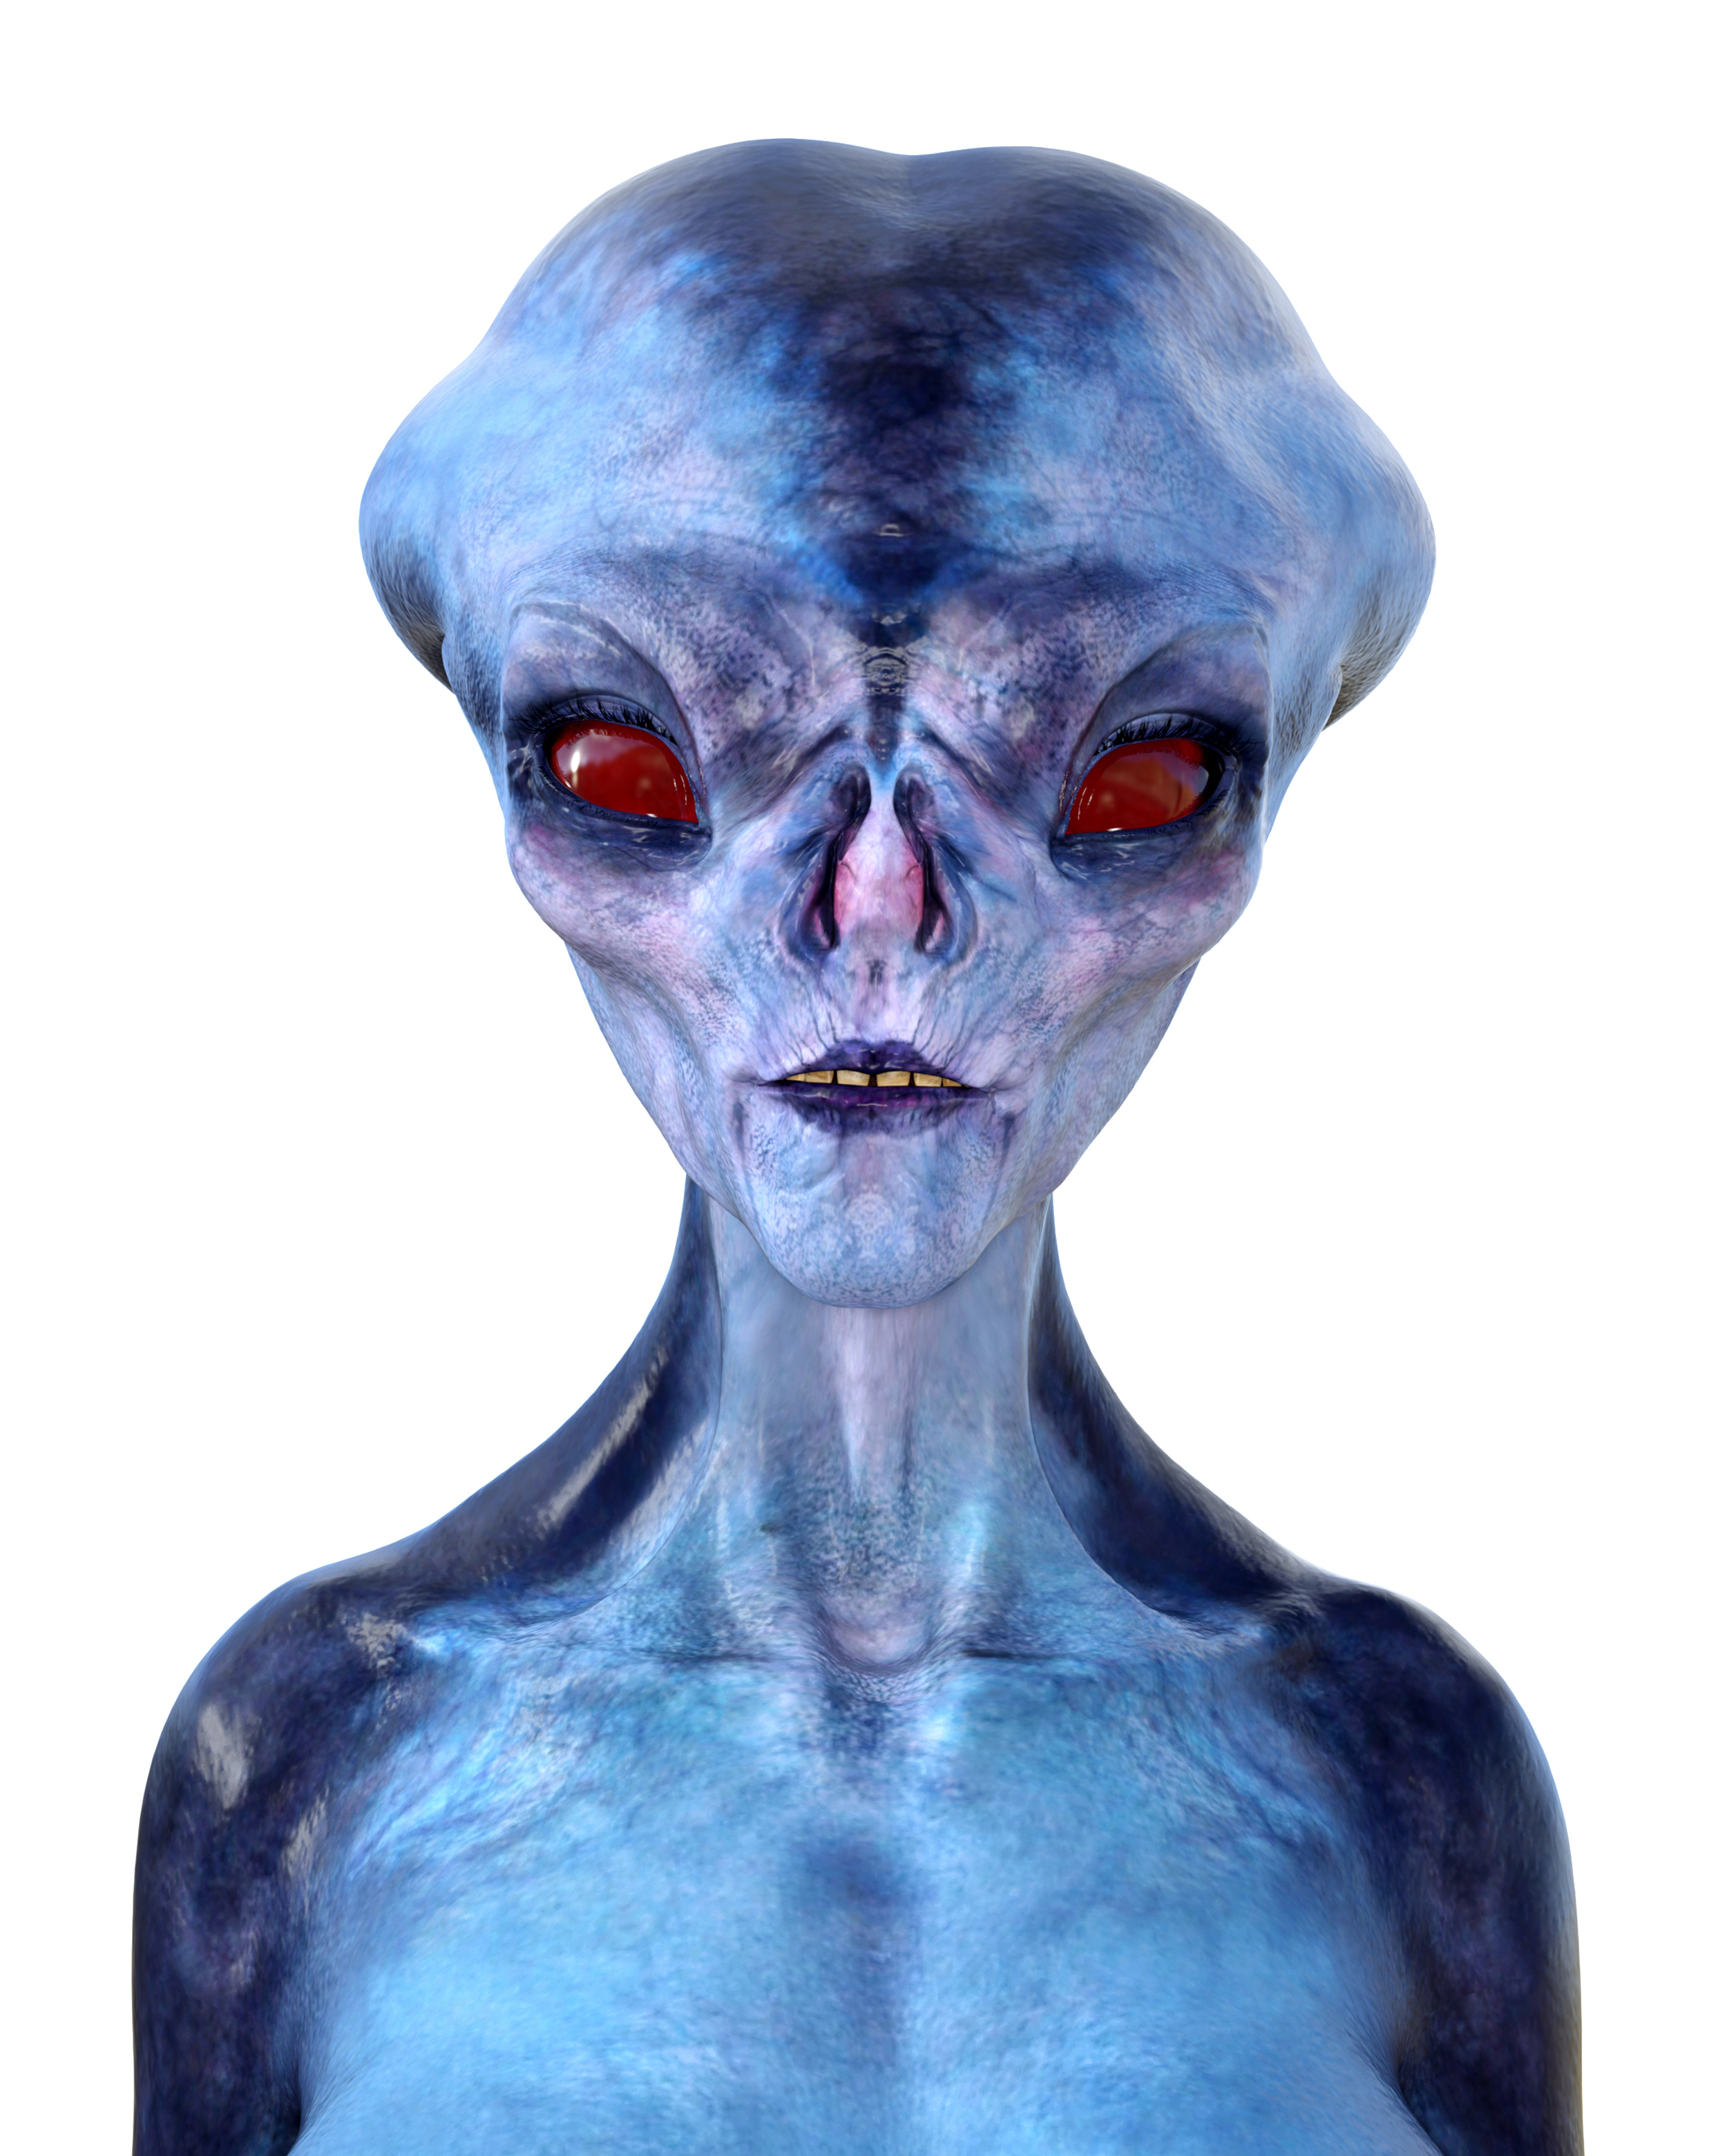 A blue-ish alien with red eyes